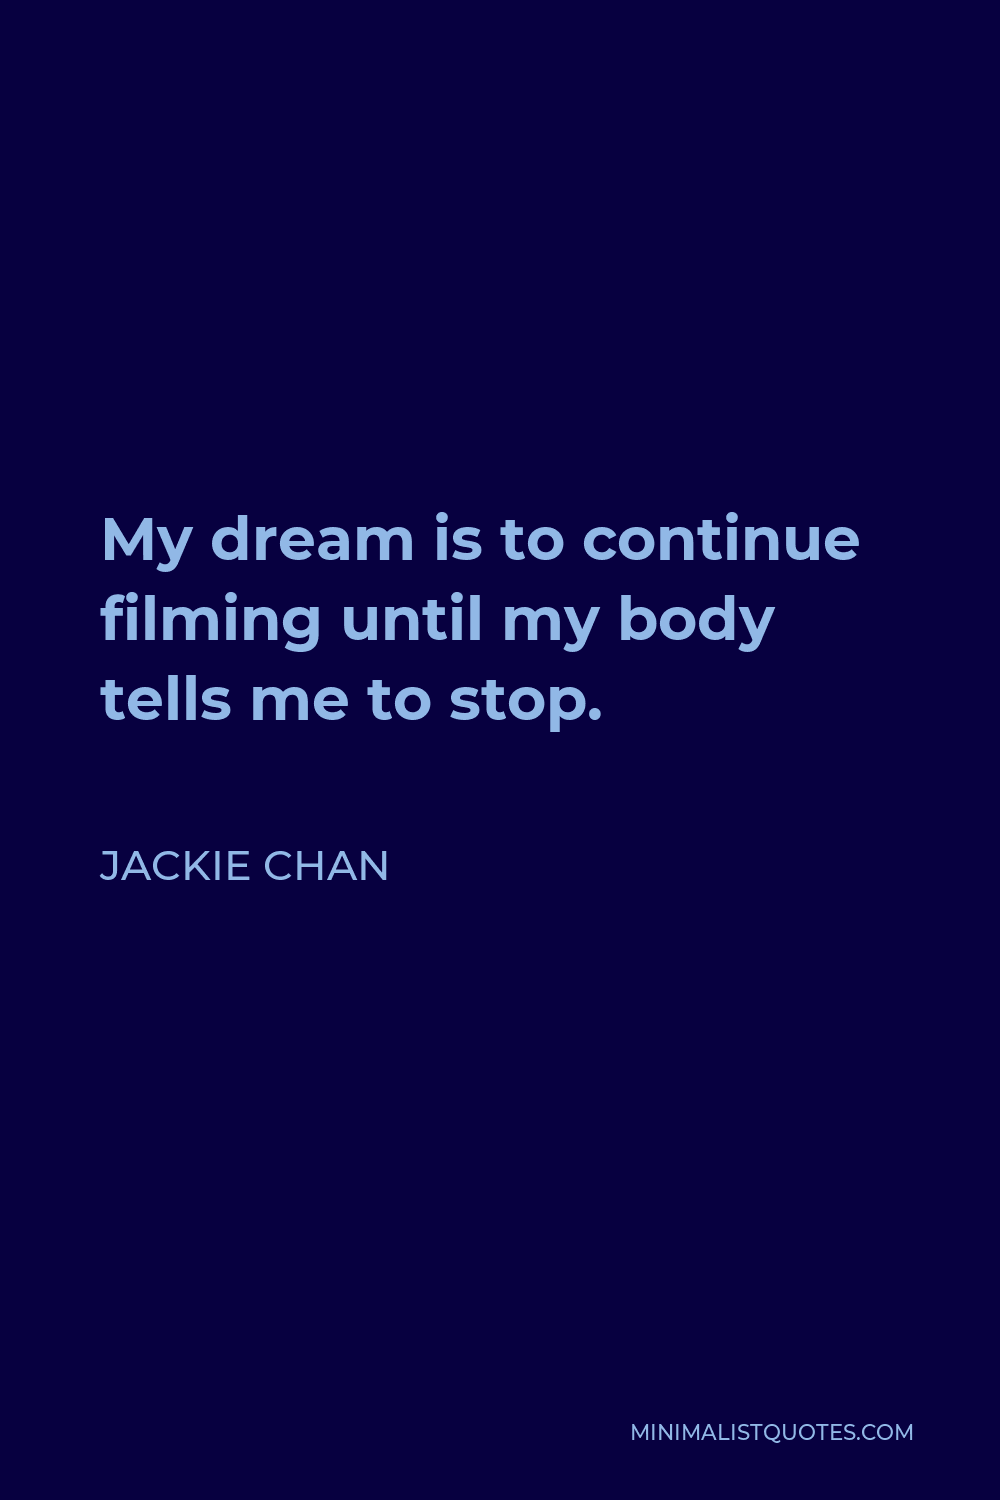 Jackie Chan Quote - My dream is to continue filming until my body tells me to stop.